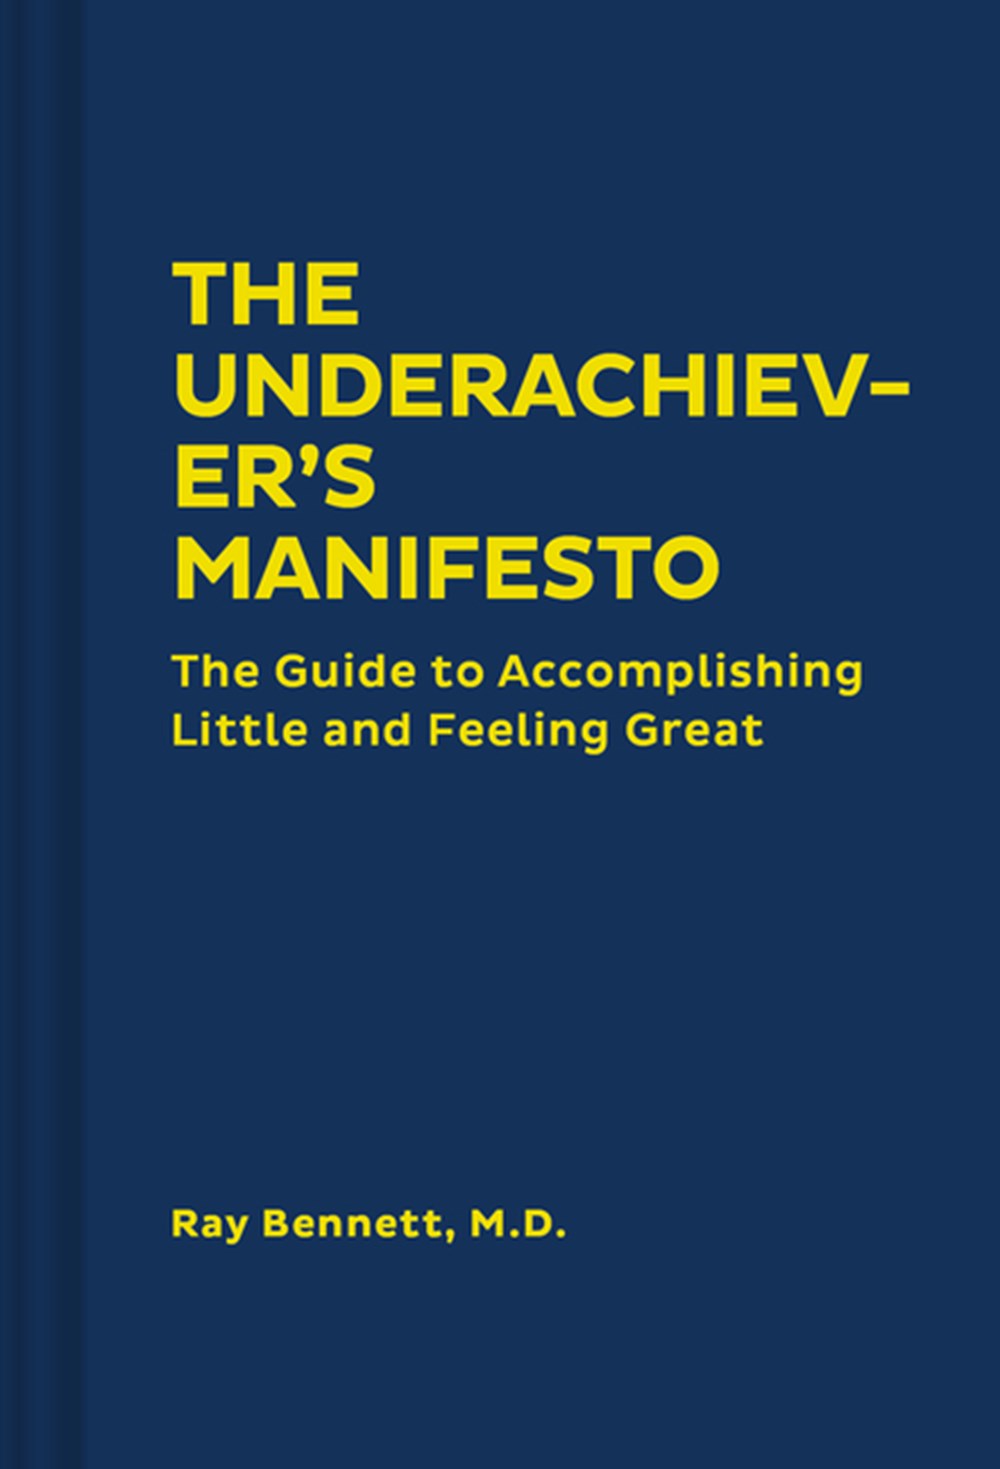 Underachiever's Manifesto: The Guide to Accomplishing Little and Feeling Great (Funny Self-Help Book